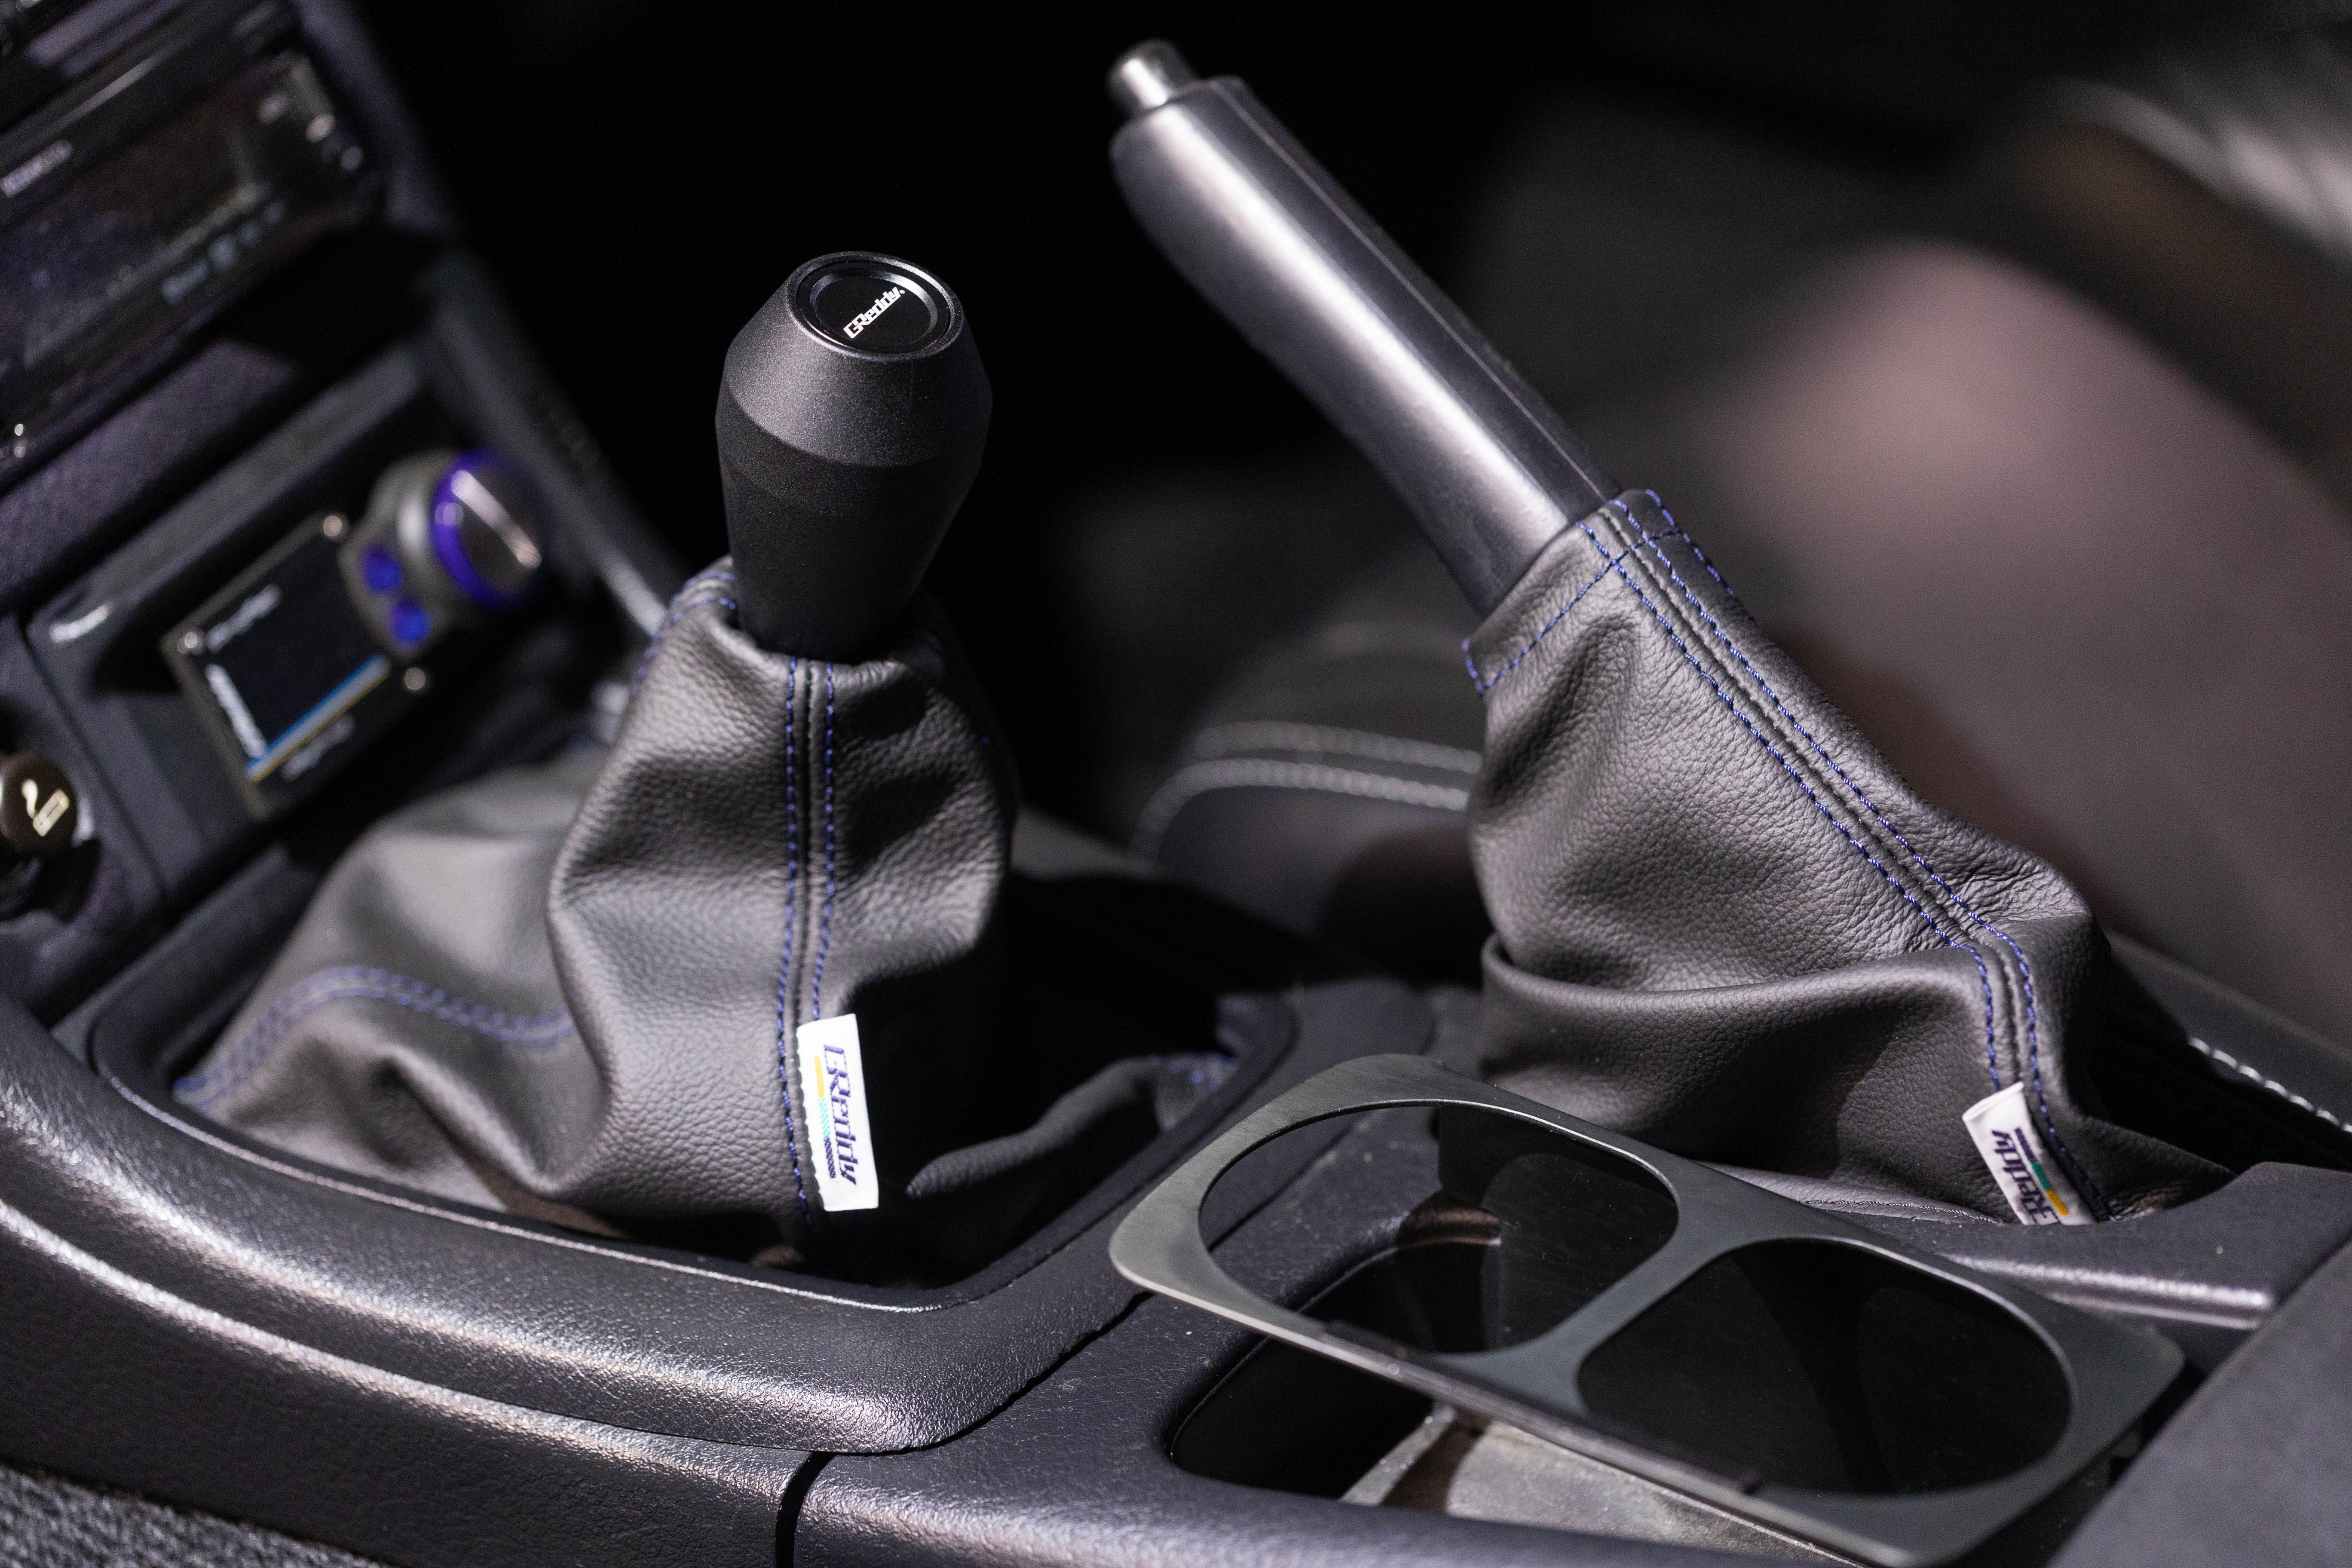 GReddy "Black-out" Shift Knobs